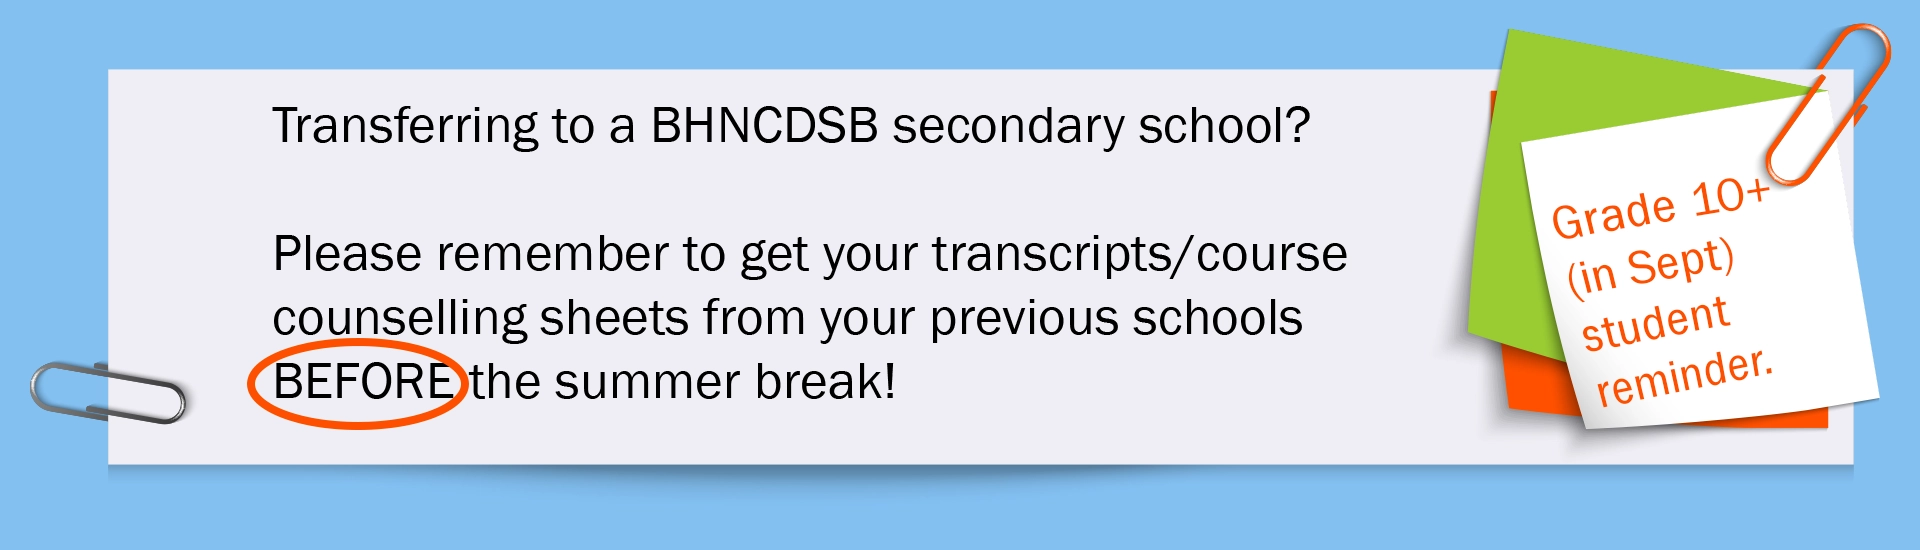 Secondary Student Reminder